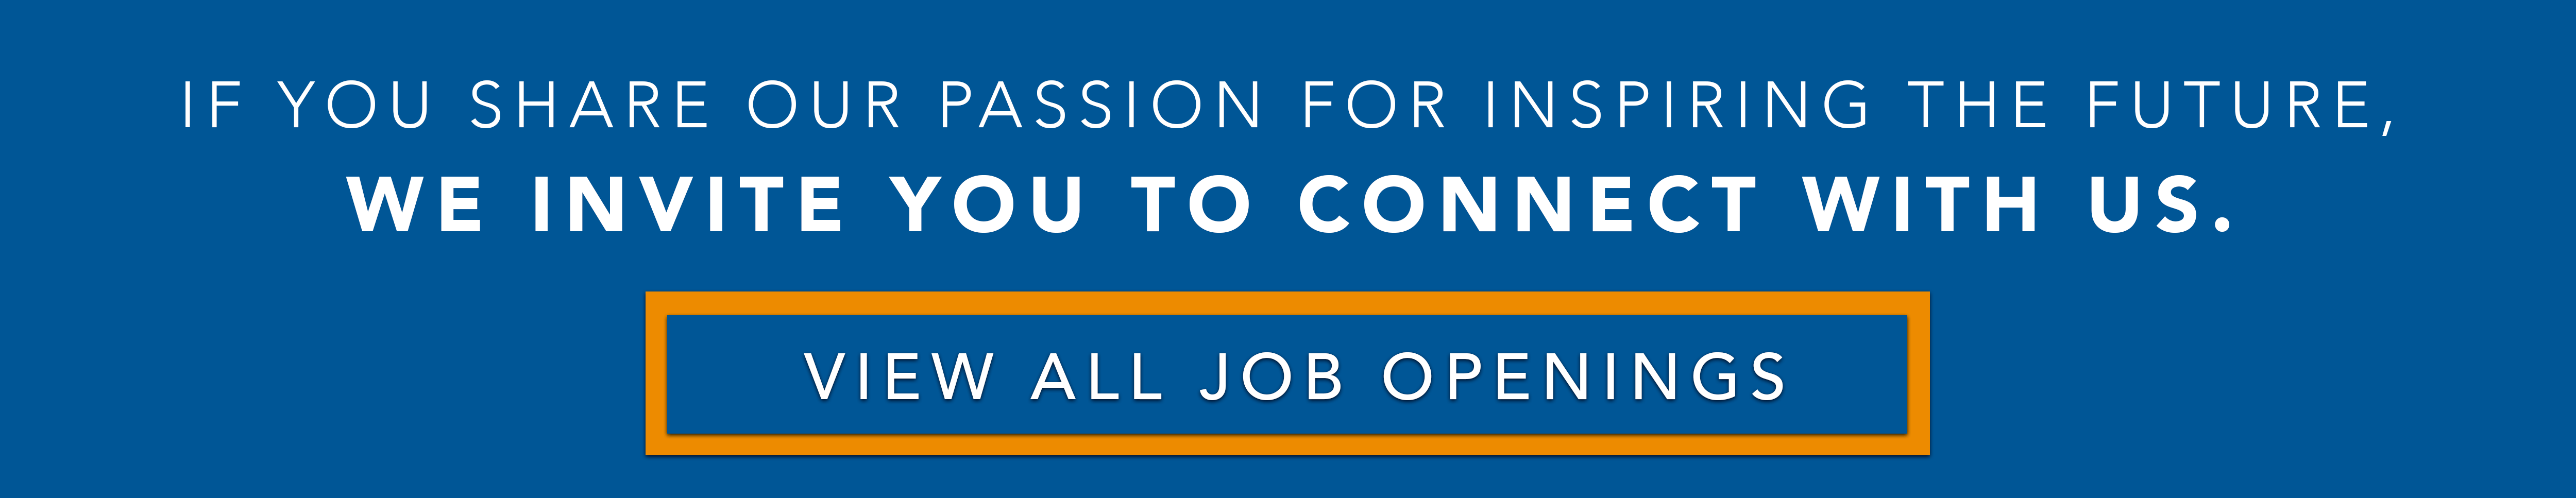 If you share our passion for inspiring the future, we invite you to connect with us. View all job openings